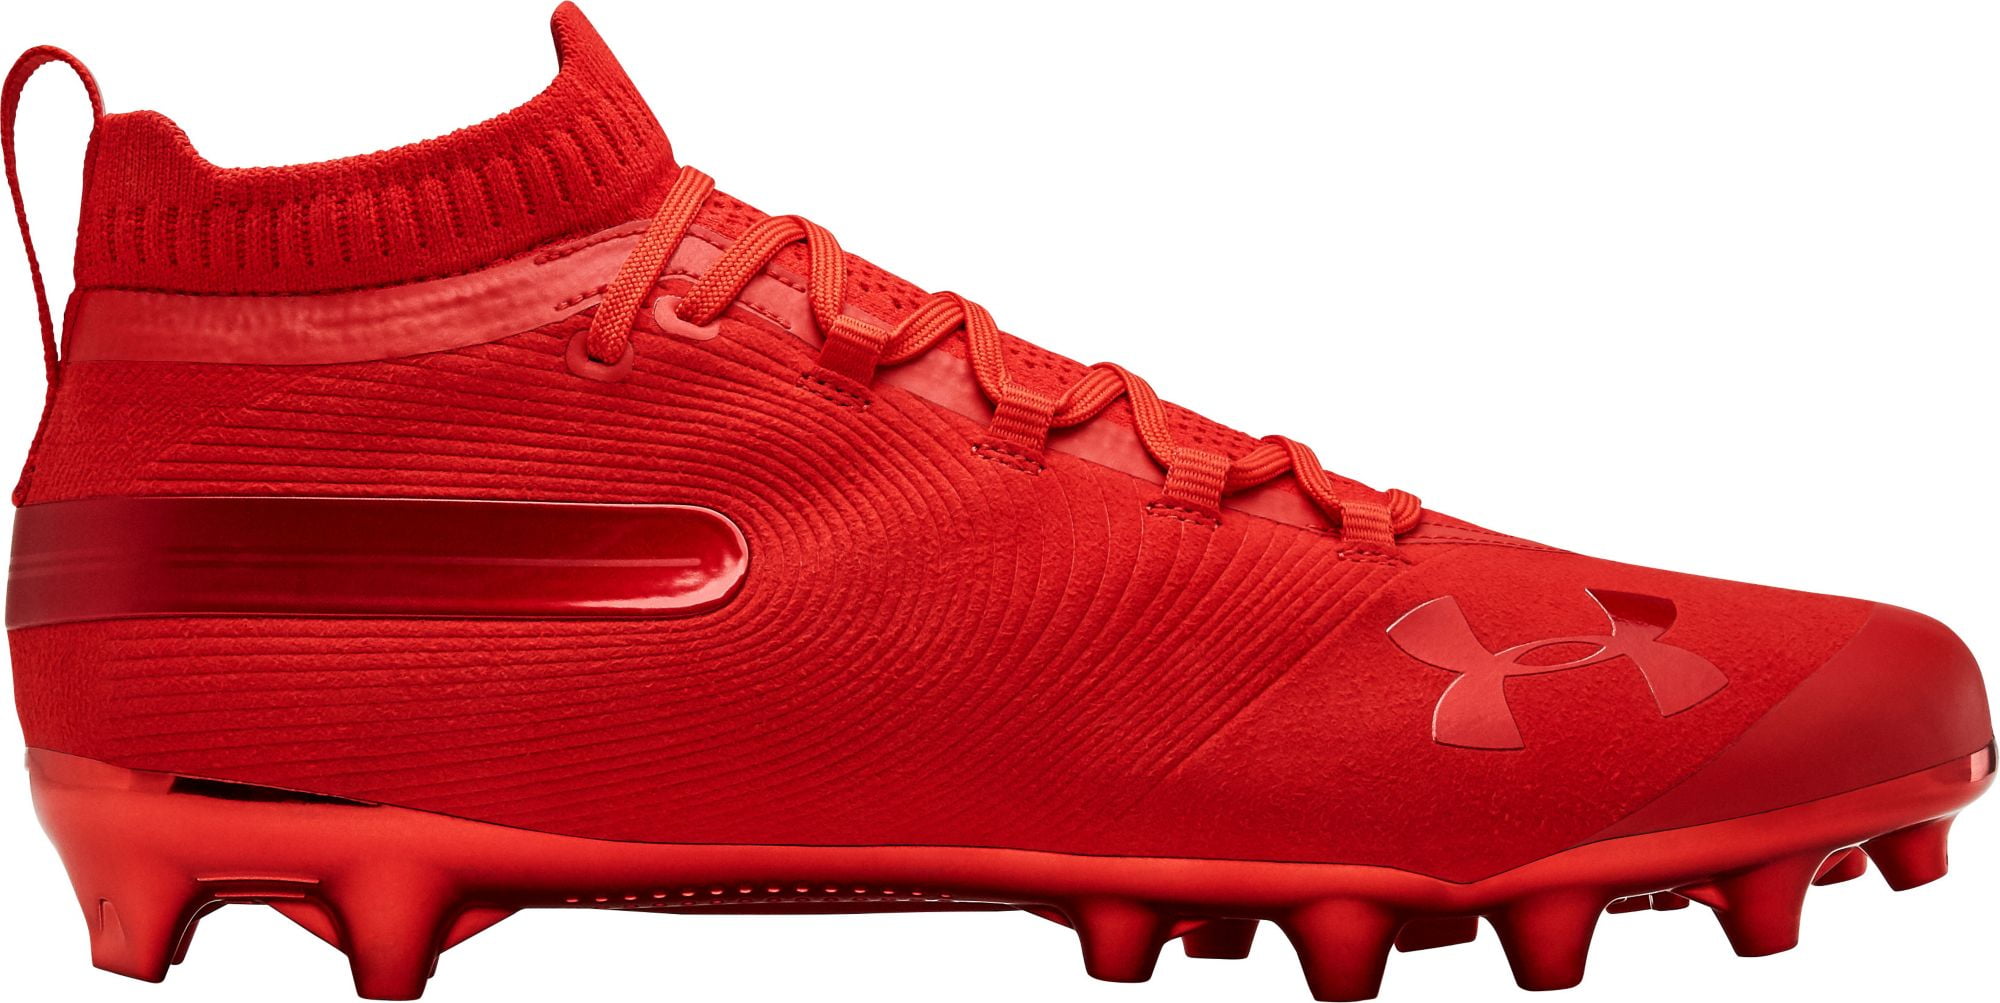 solid red football cleats